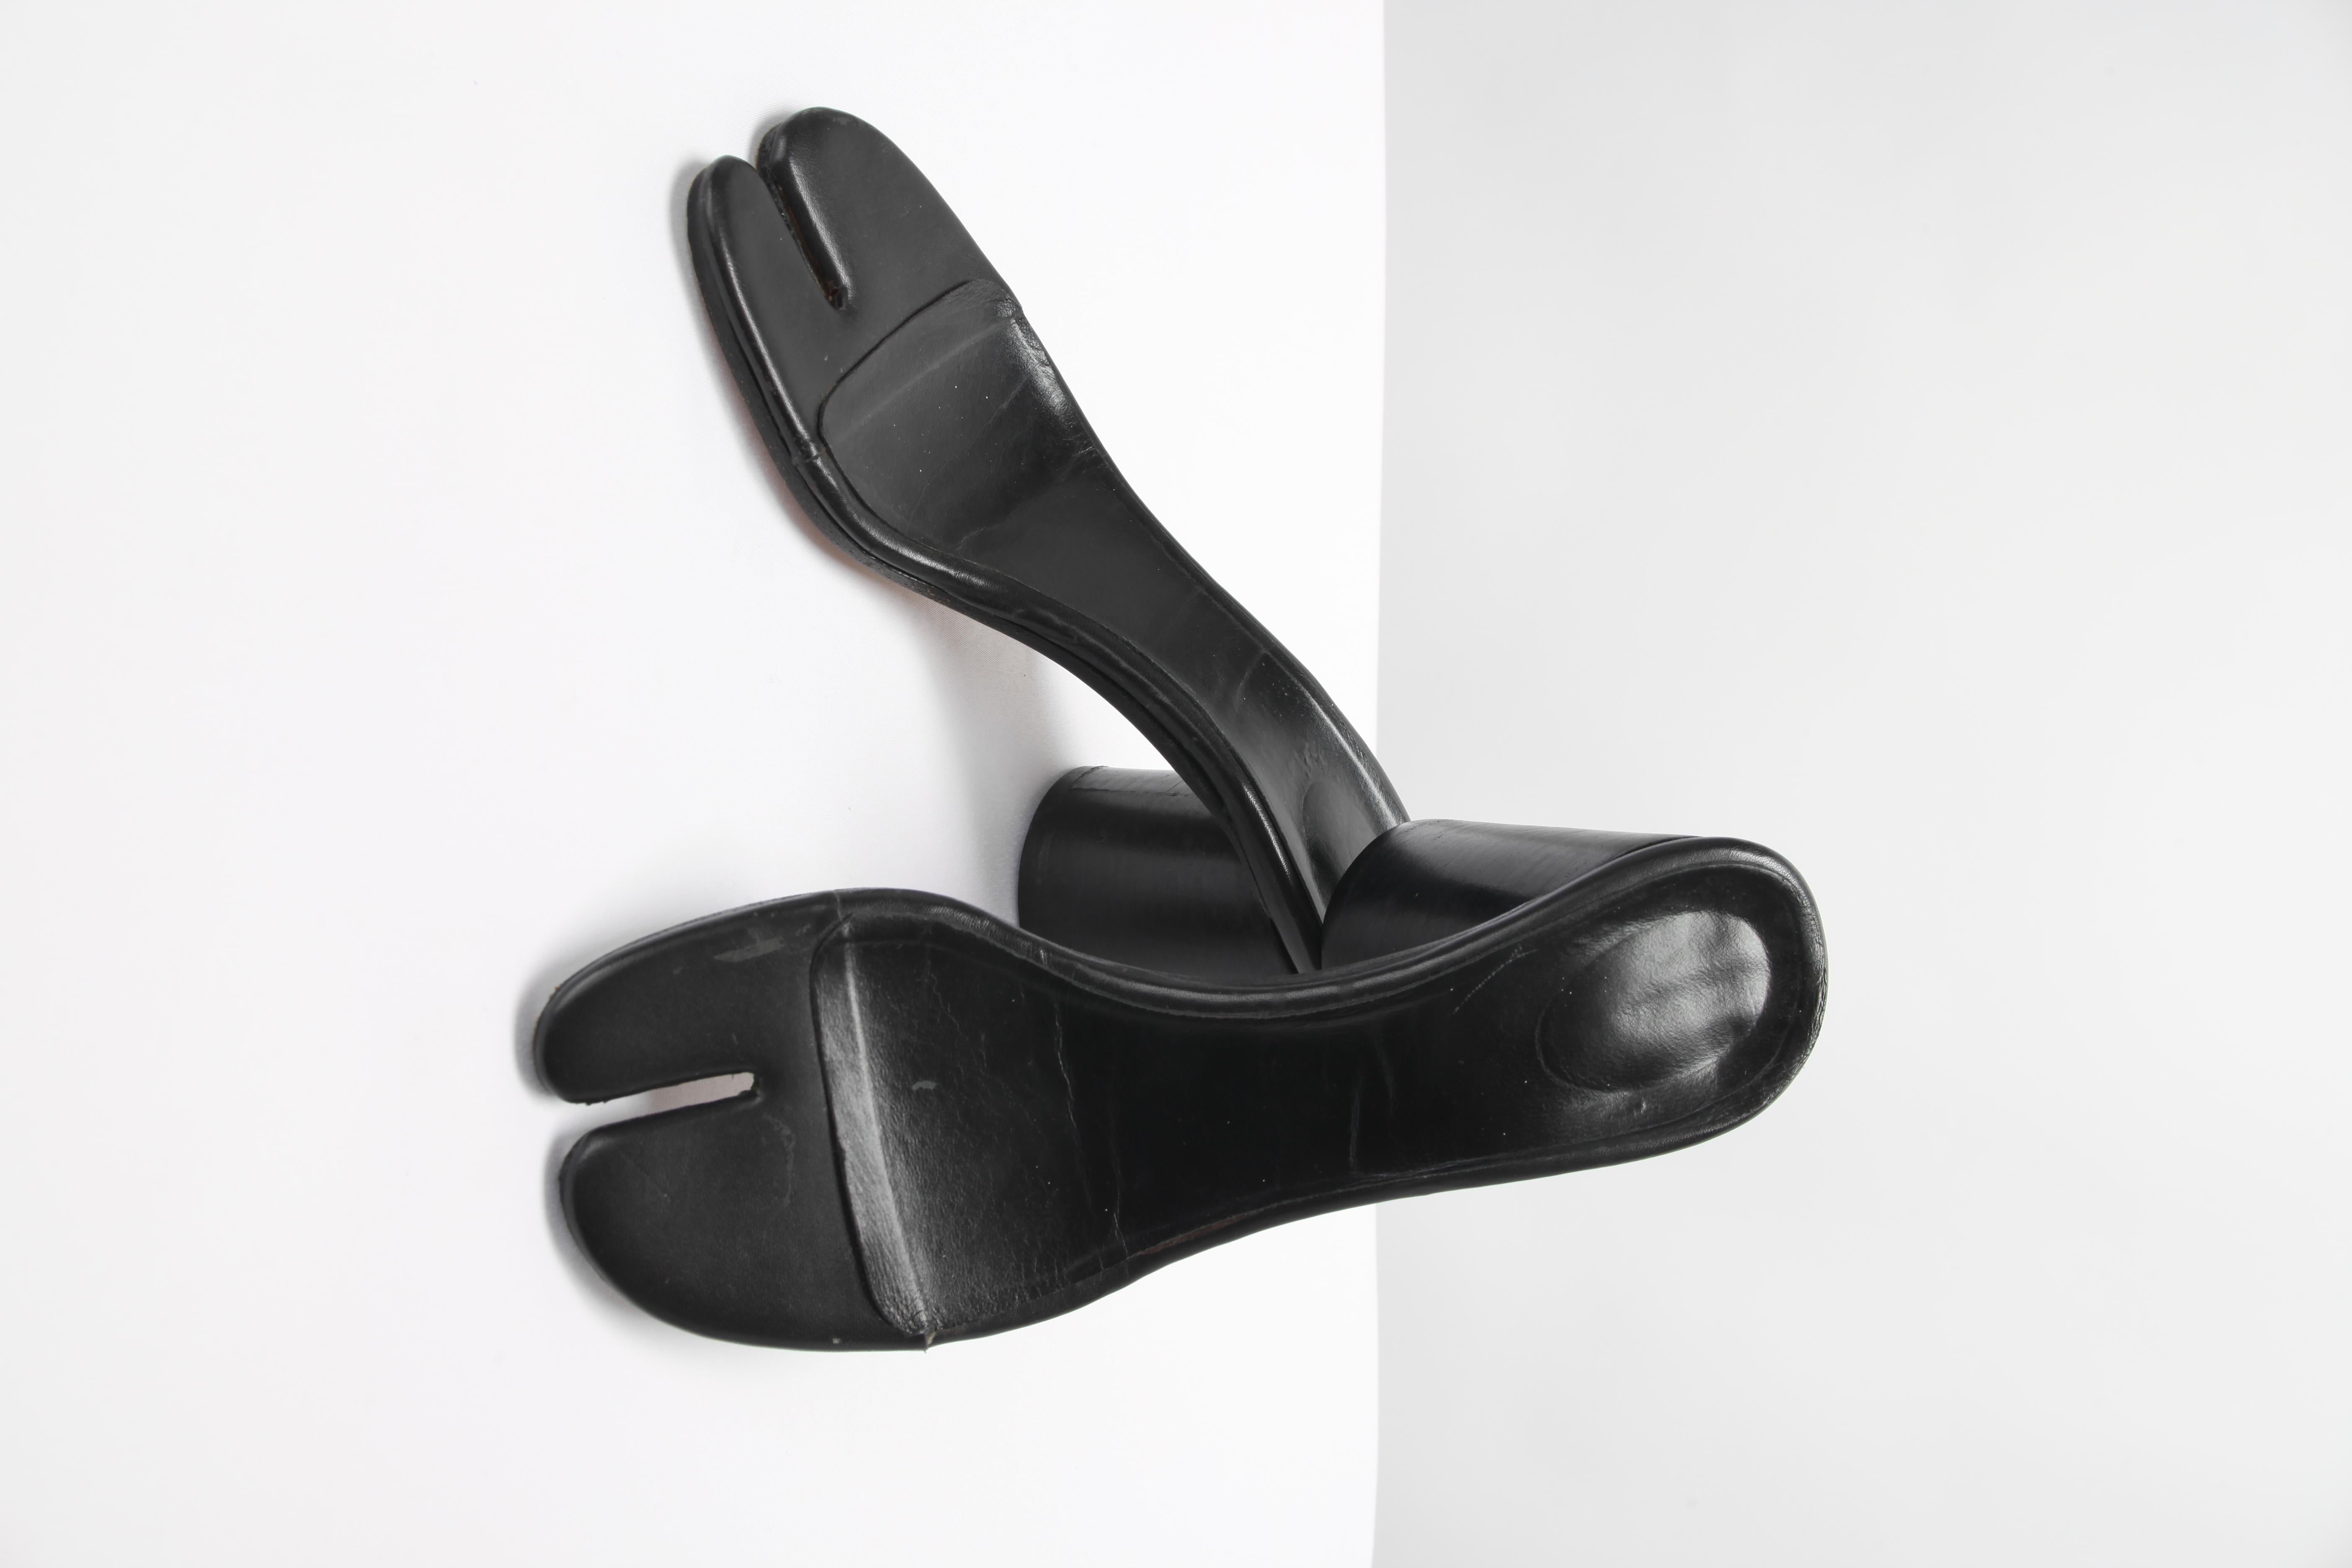 Martin Margiela black leather 'Les Topless' Tabi sandals, SS 1996,
Designed to be worn with clear tape.
Marked EU Size 40.  Fits US Size Size 10.
